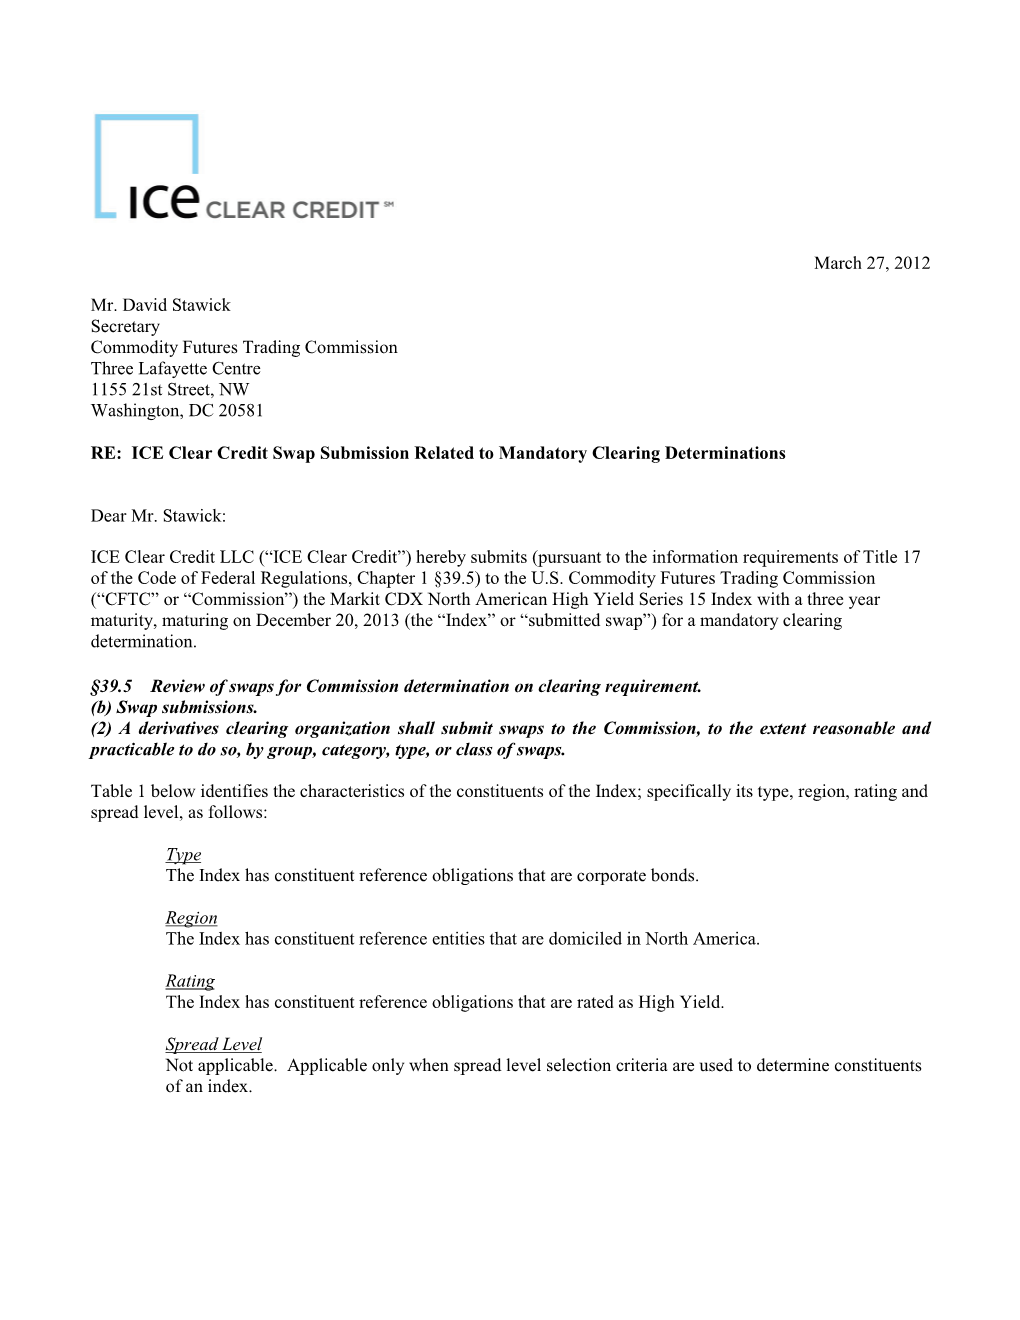 ICE Clear Credit Swap Submission 3-27-12